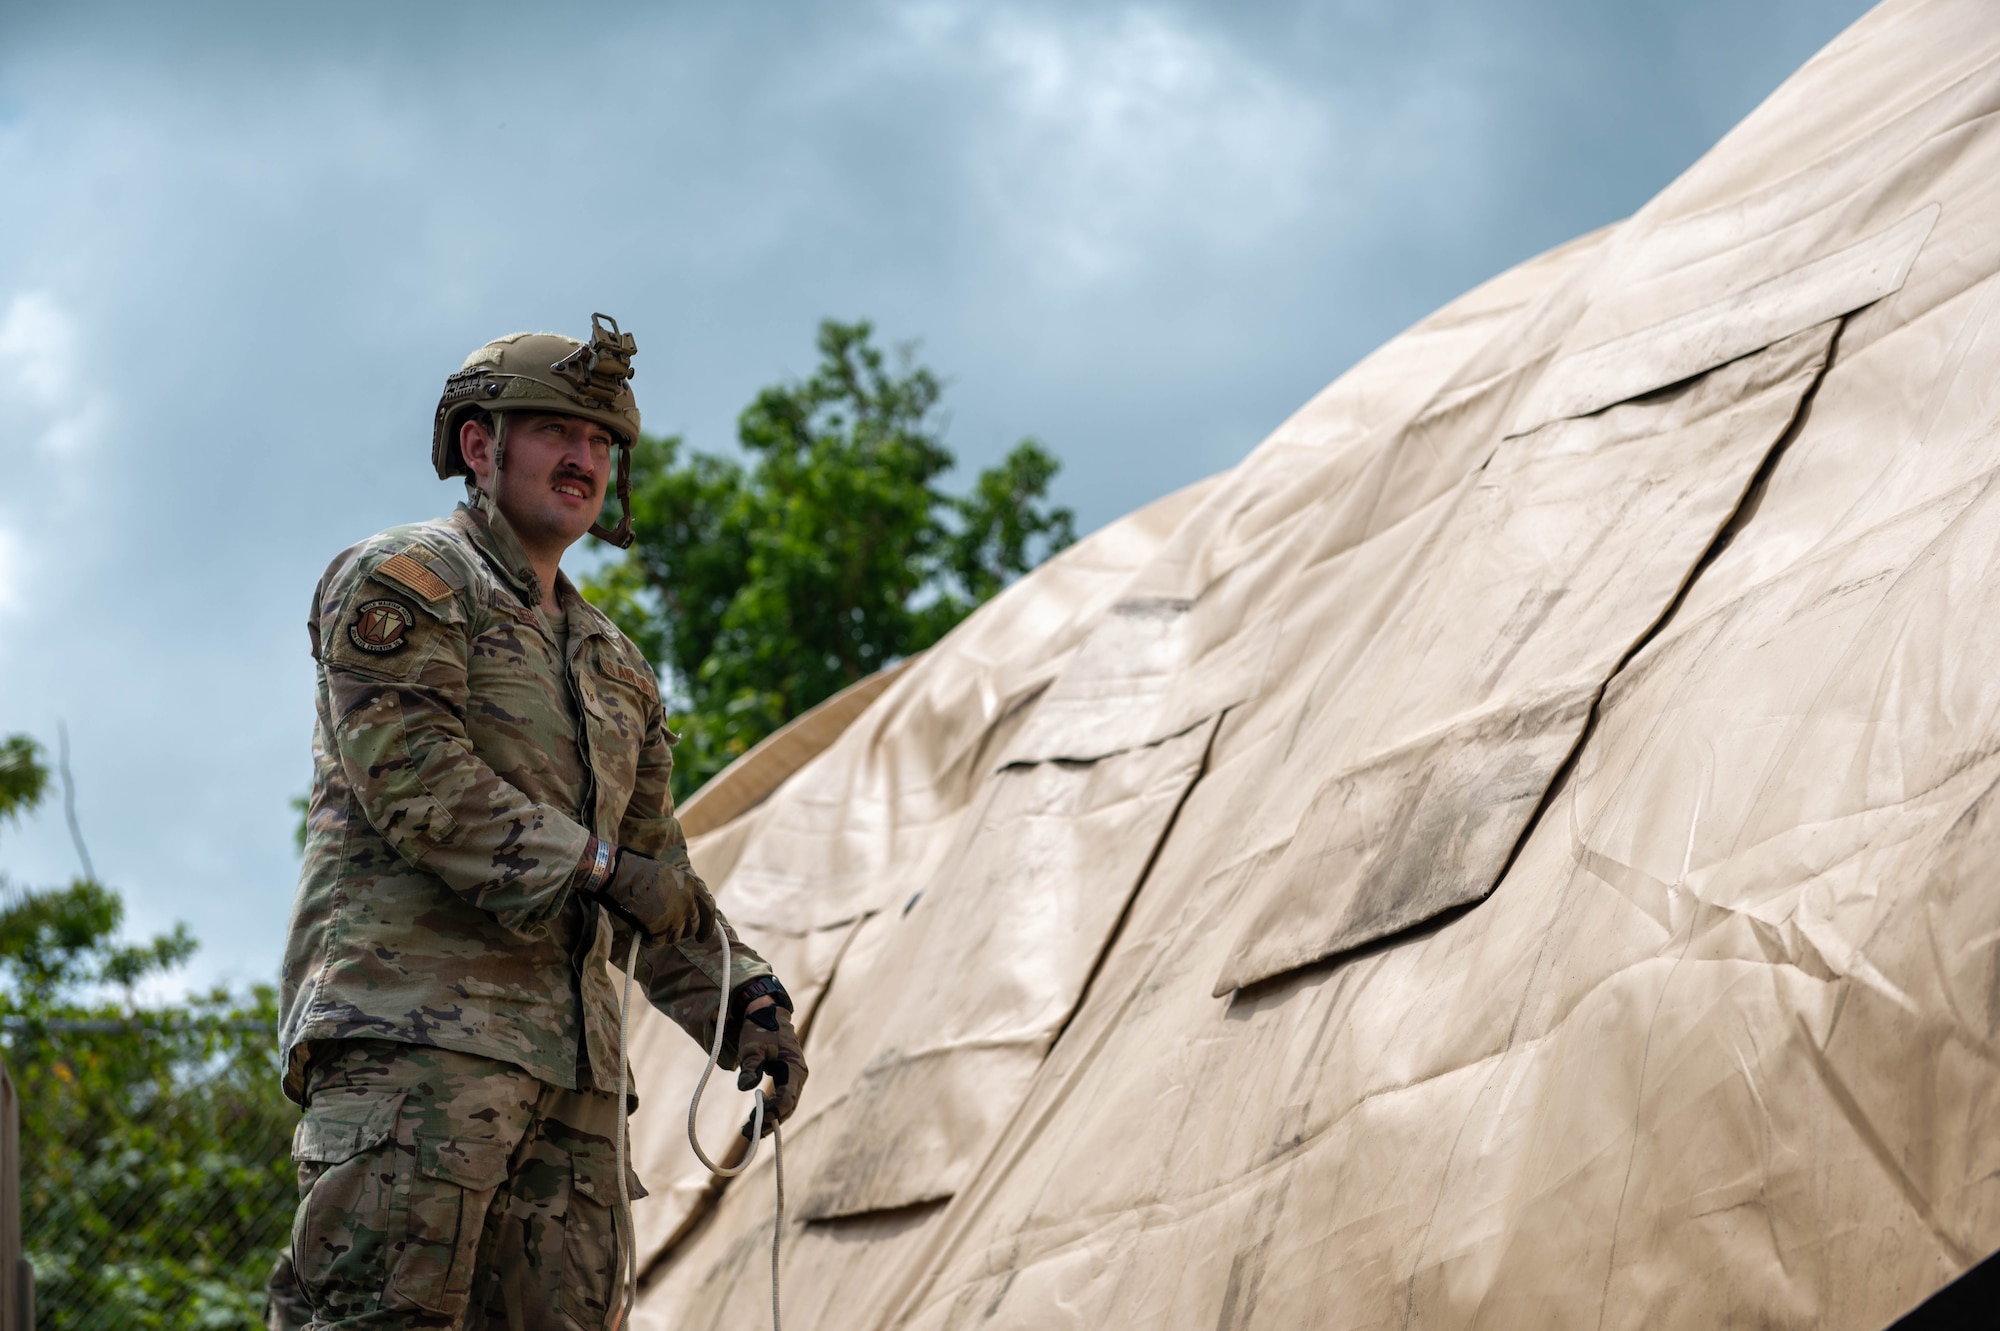 A U.S. Air Force Airman, assigned to the 36th Civil Engineering Squadron, builds a tent during Prime Base Engineer Emergency Force training on Andersen Air Force Base, Guam, Sept. 19, 2023. Airmen assigned to the 36th CES participated in Prime Base Engineer Emergency Force to develop their core competencies on base and during deployment. (U.S. Air Force photo by Airman Allon Lapaix)